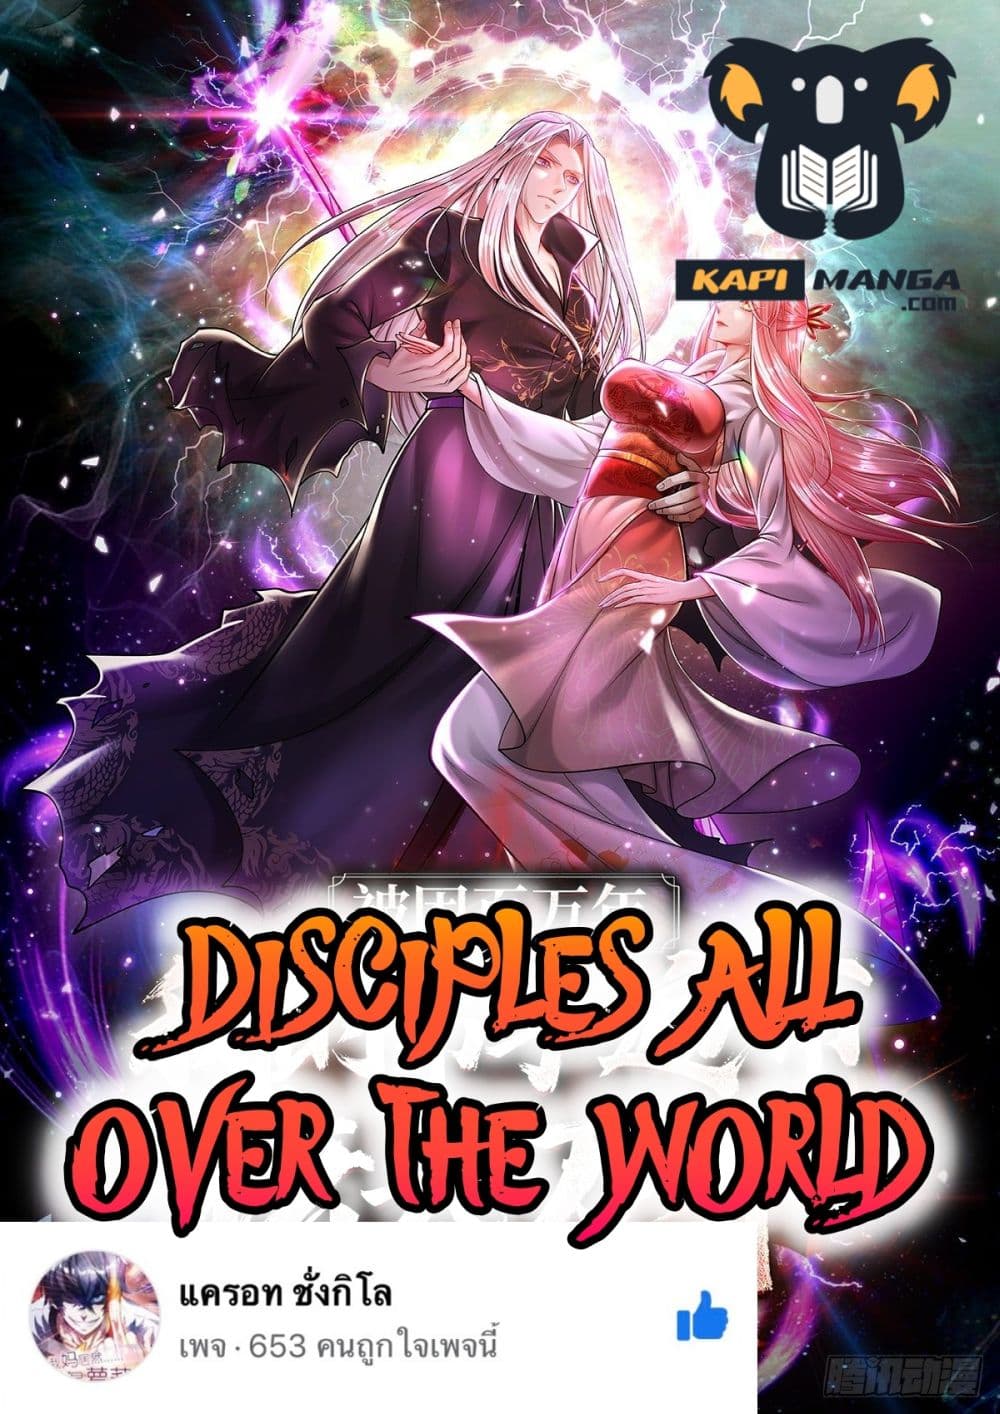 Disciples All Over the World à¸à¸­à¸à¸à¸µà¹ 57 (2)